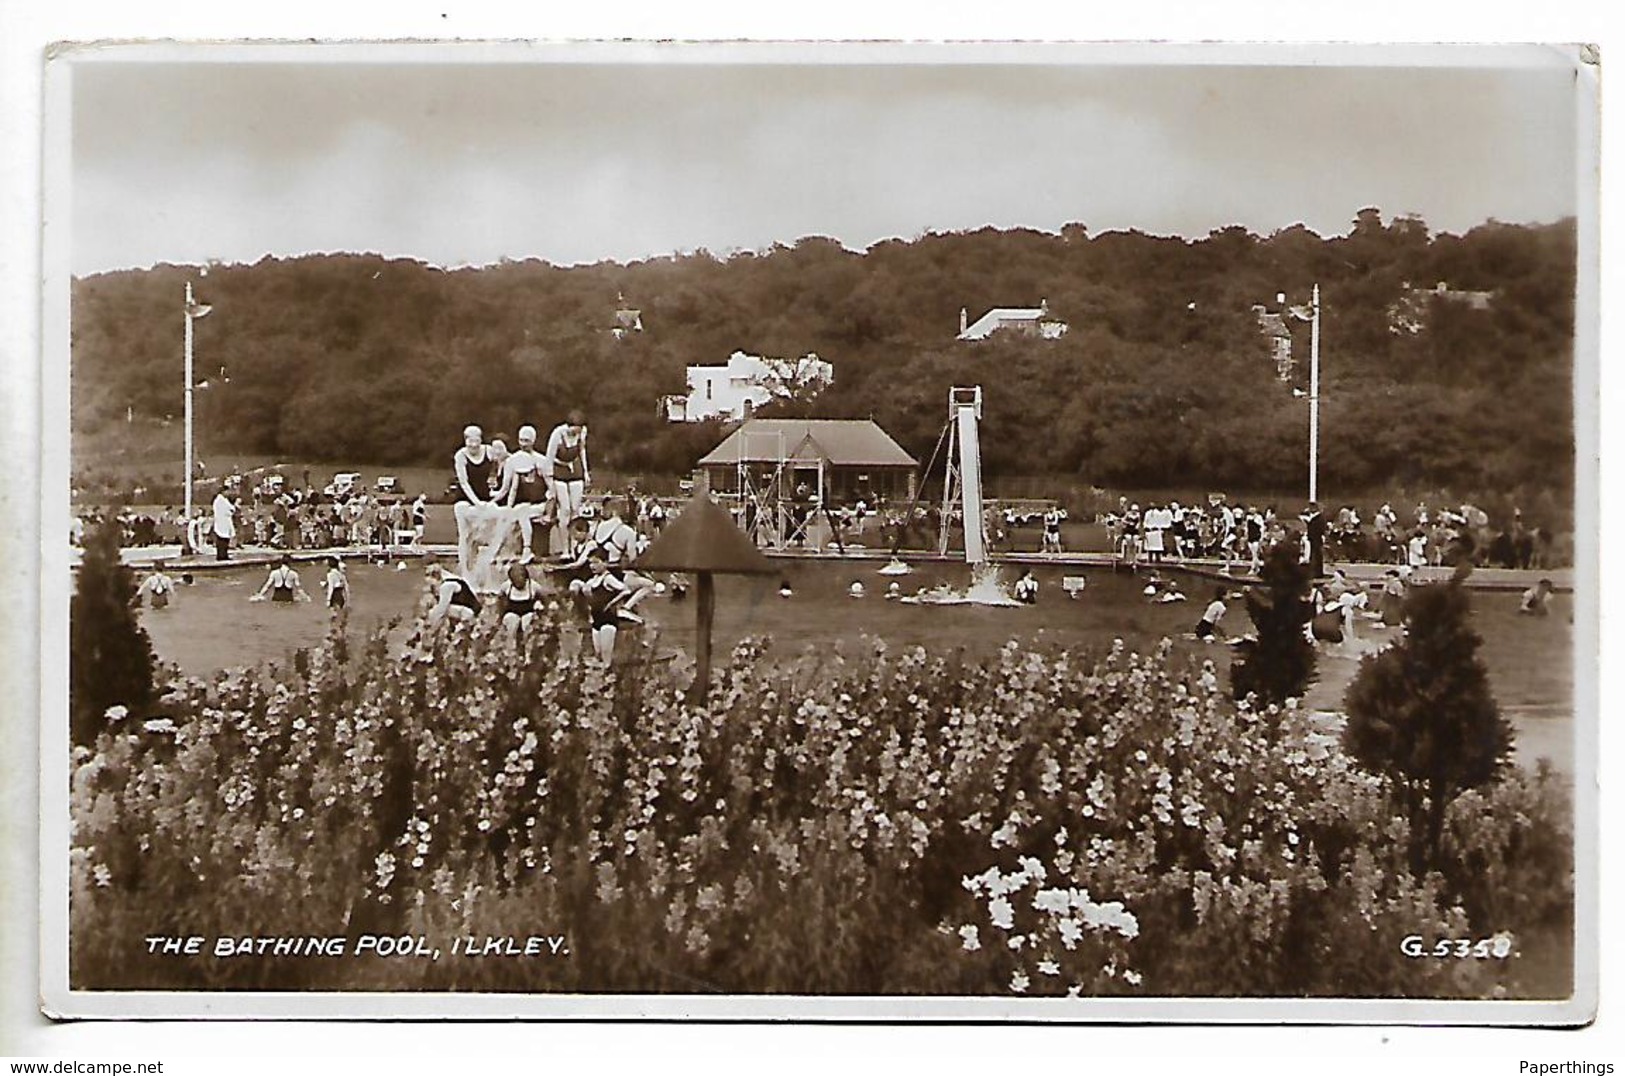 Real Photo Postcard, Ilkley, The Bathing Pool, Crowds Of People Swimming, Fountain, Slide, Landscape. 1937. - Bradford